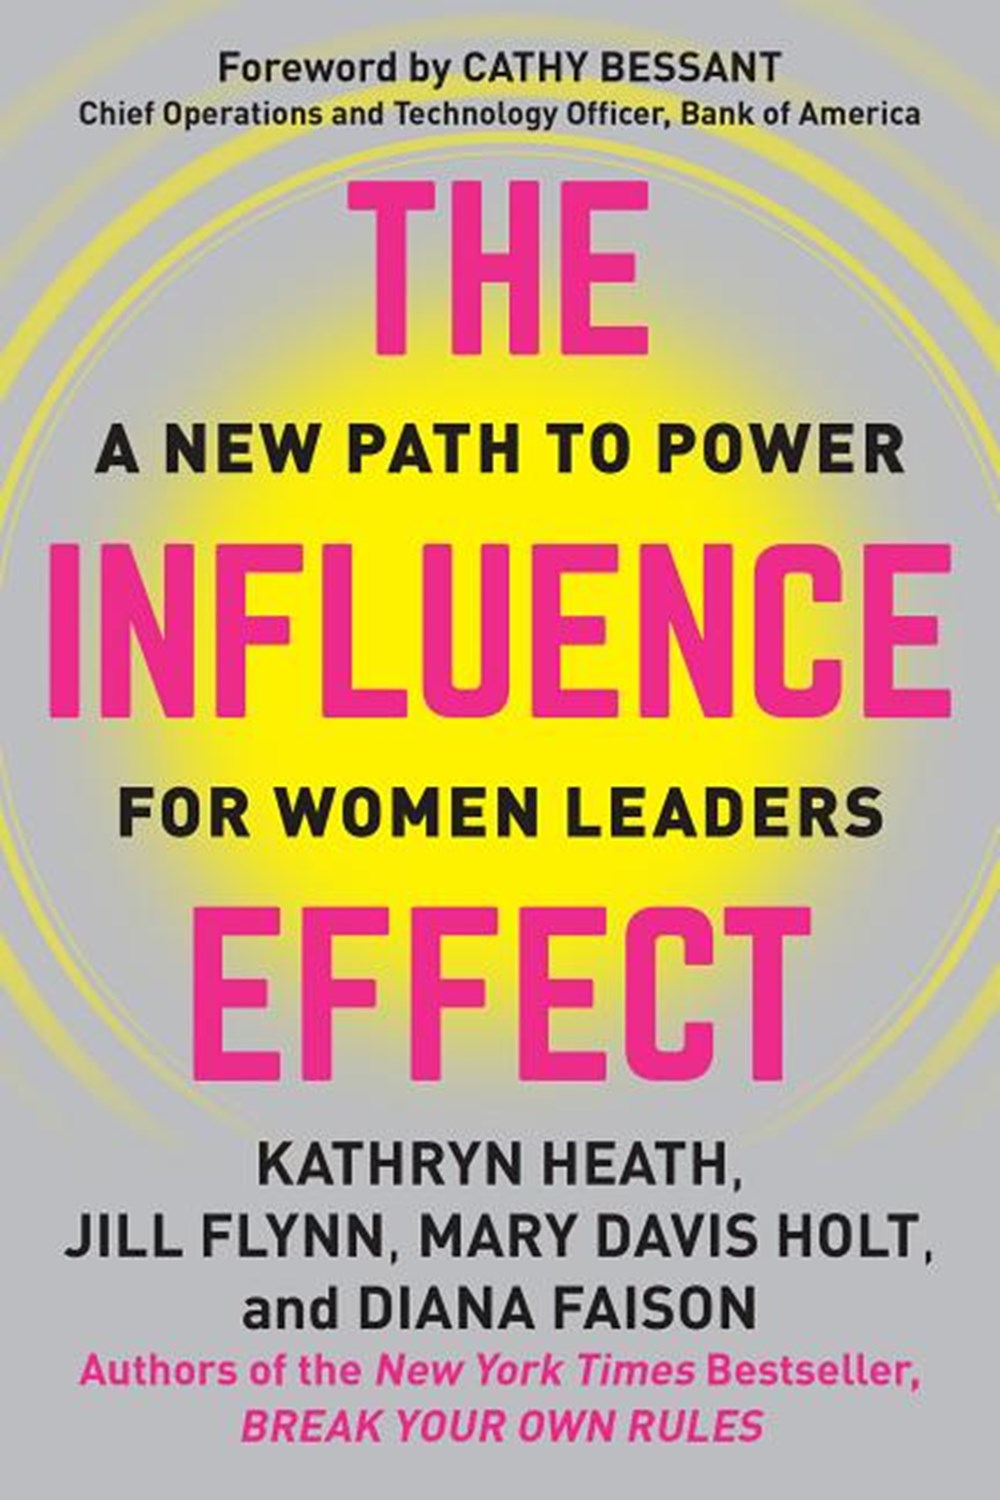 Influence Effect A New Path to Power for Women Leaders